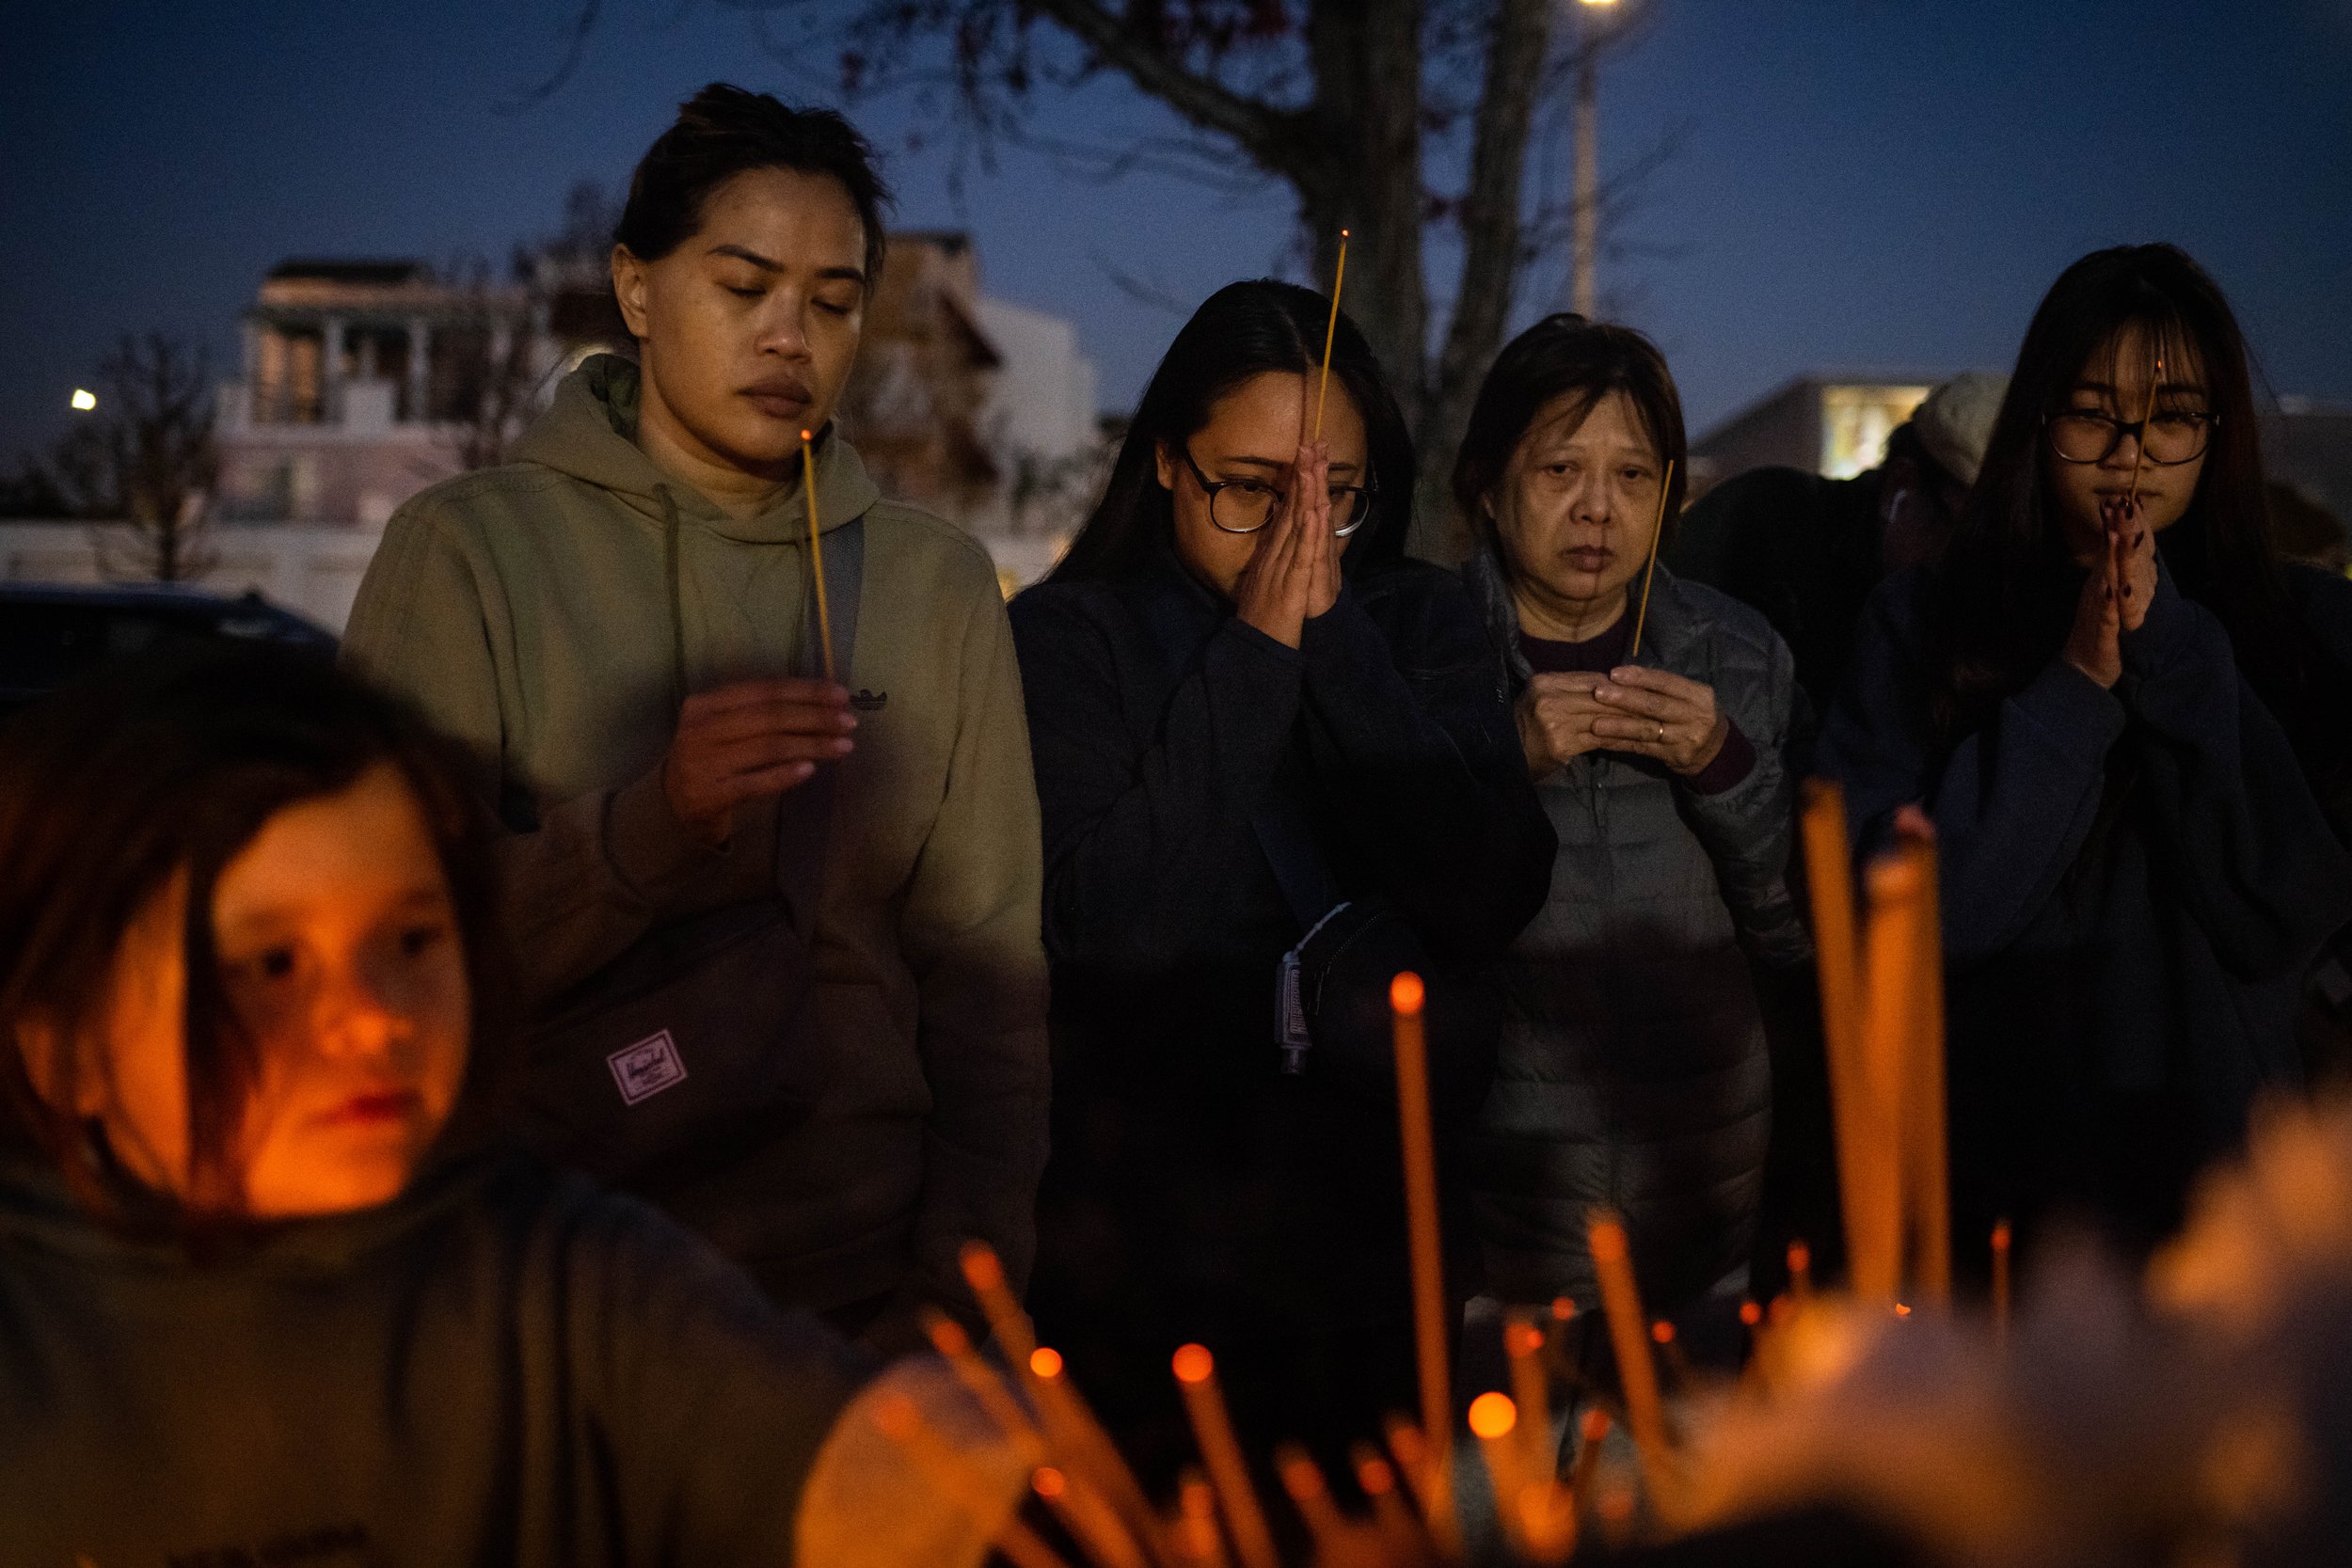  Mourners leave blessings for the victims of the mass shooting at the Star Ballroom Dance Studio at a candlelight vigil at Monterey Park City Hall on Tuesday, January 24, 2023.  